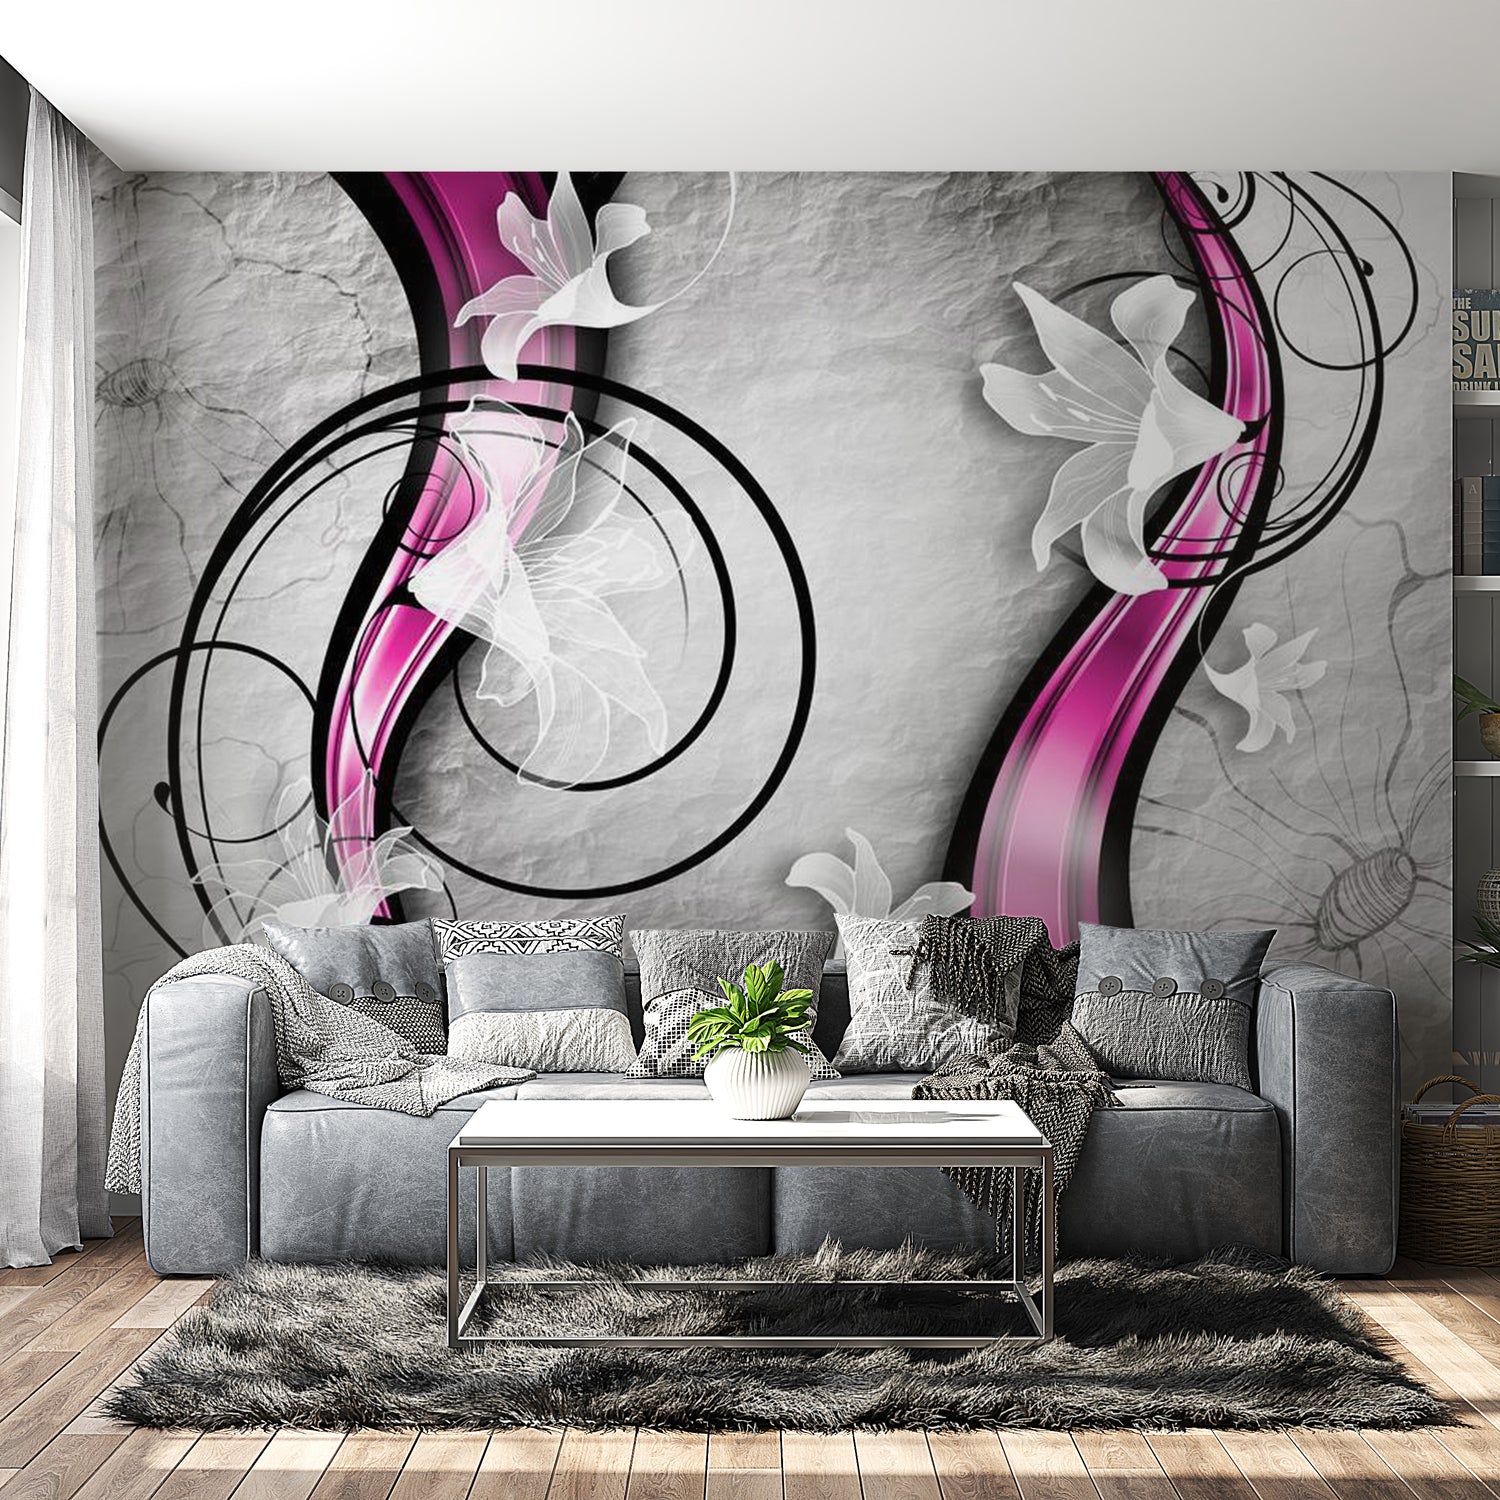 Peel & Stick Floral Wall Mural - Dance With Lilies - Removable Wall Decals